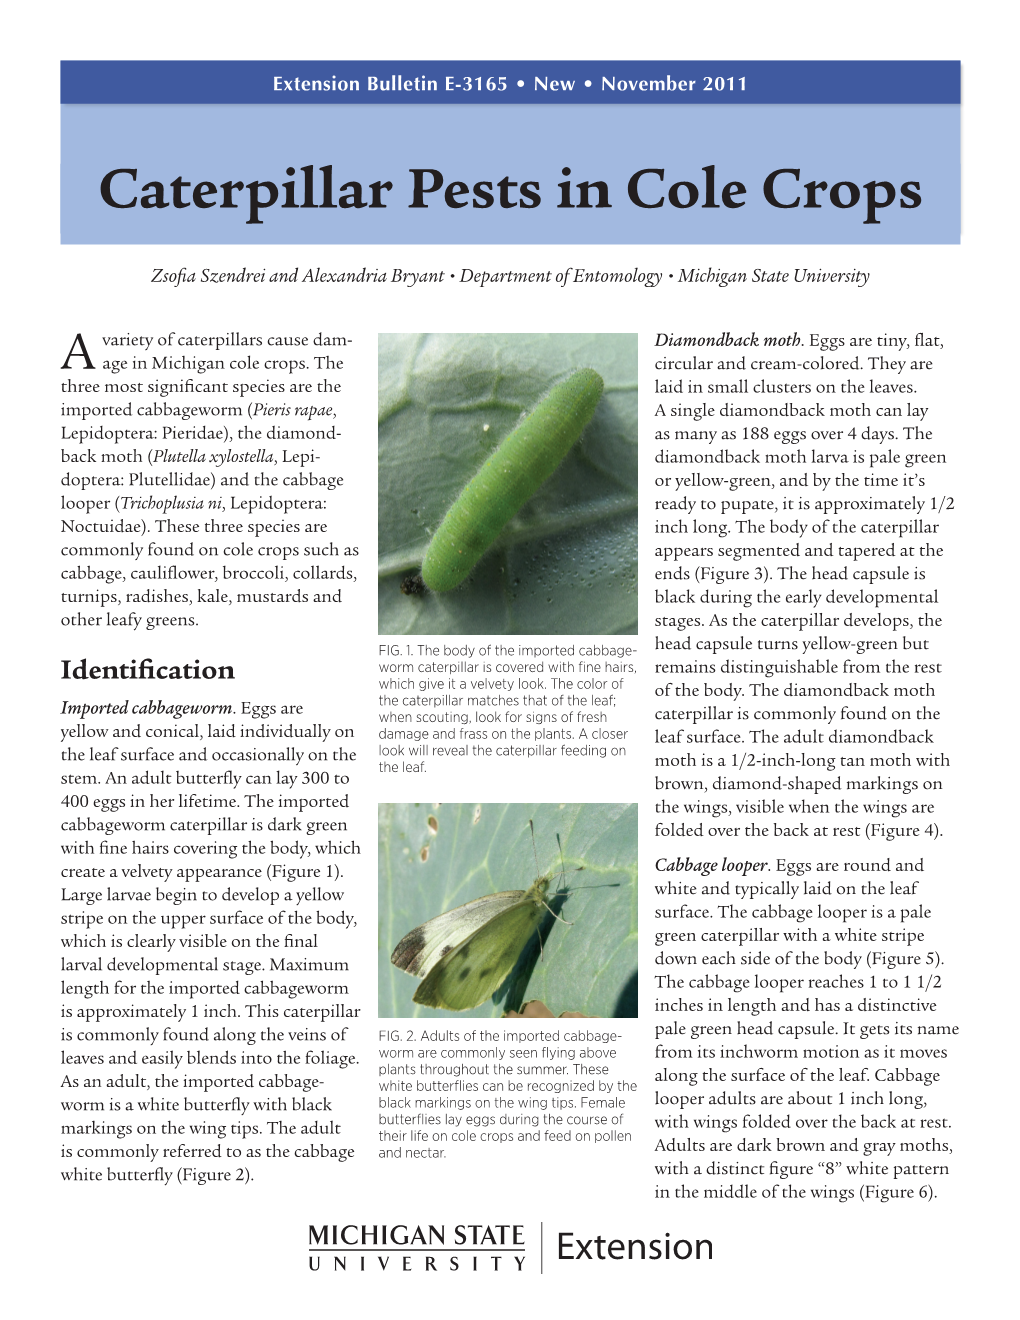 Caterpillar Pests in Cole Crops